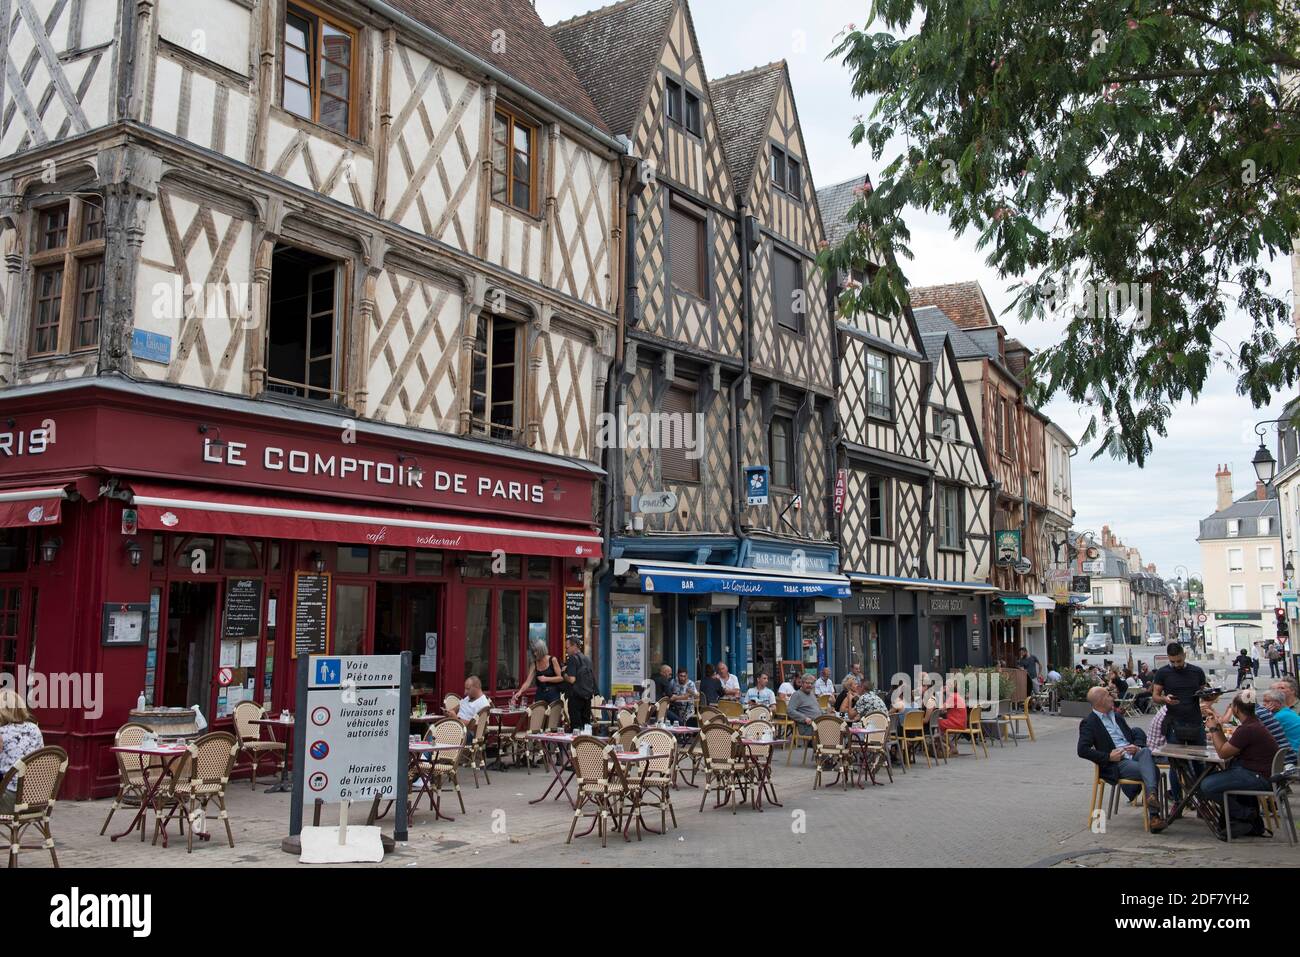 Sidewalk cafe in Jean Girard Street, Gordaine Square, Bourges, Cher department, Province of Berry, Centre-Val de Loire region, France. Stock Photo